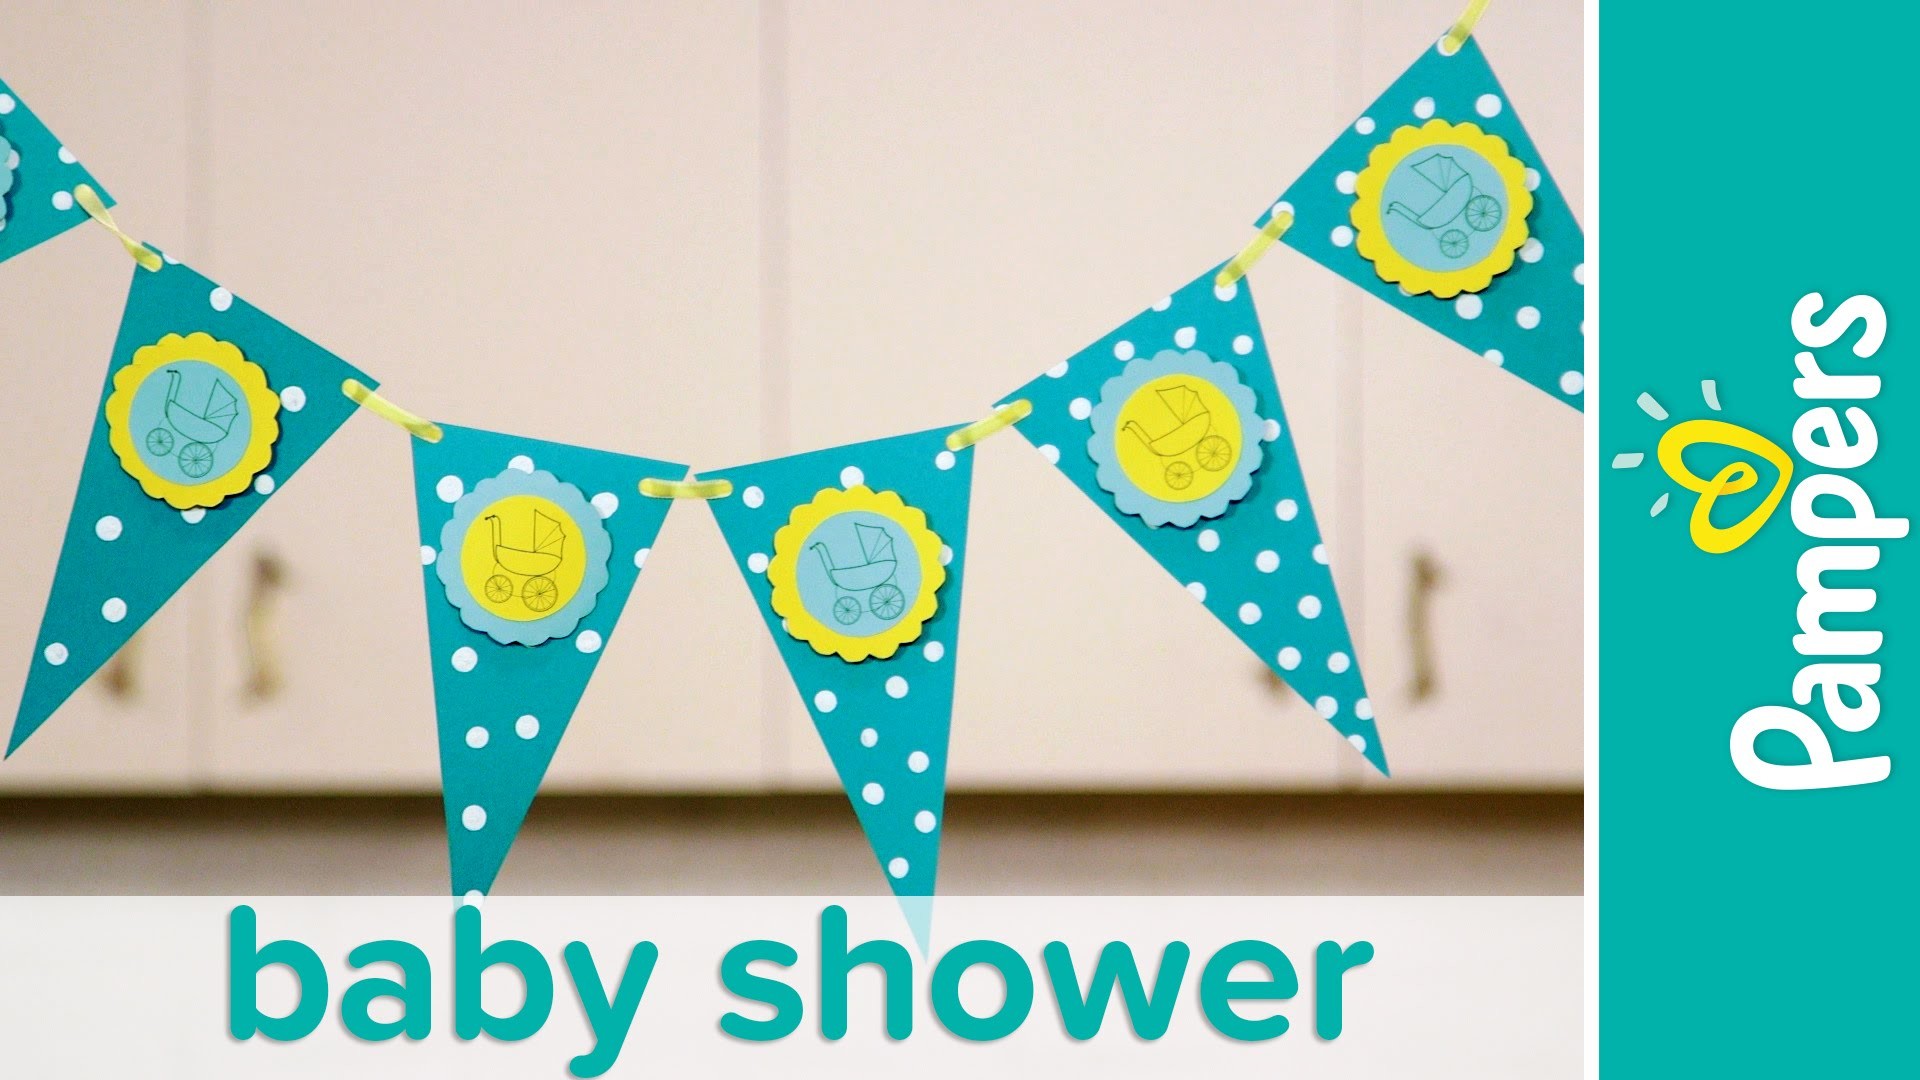 1920x1080 Baby Shower Ideas: Stroller Banner (Party Decorations) | Pampers - YouTube